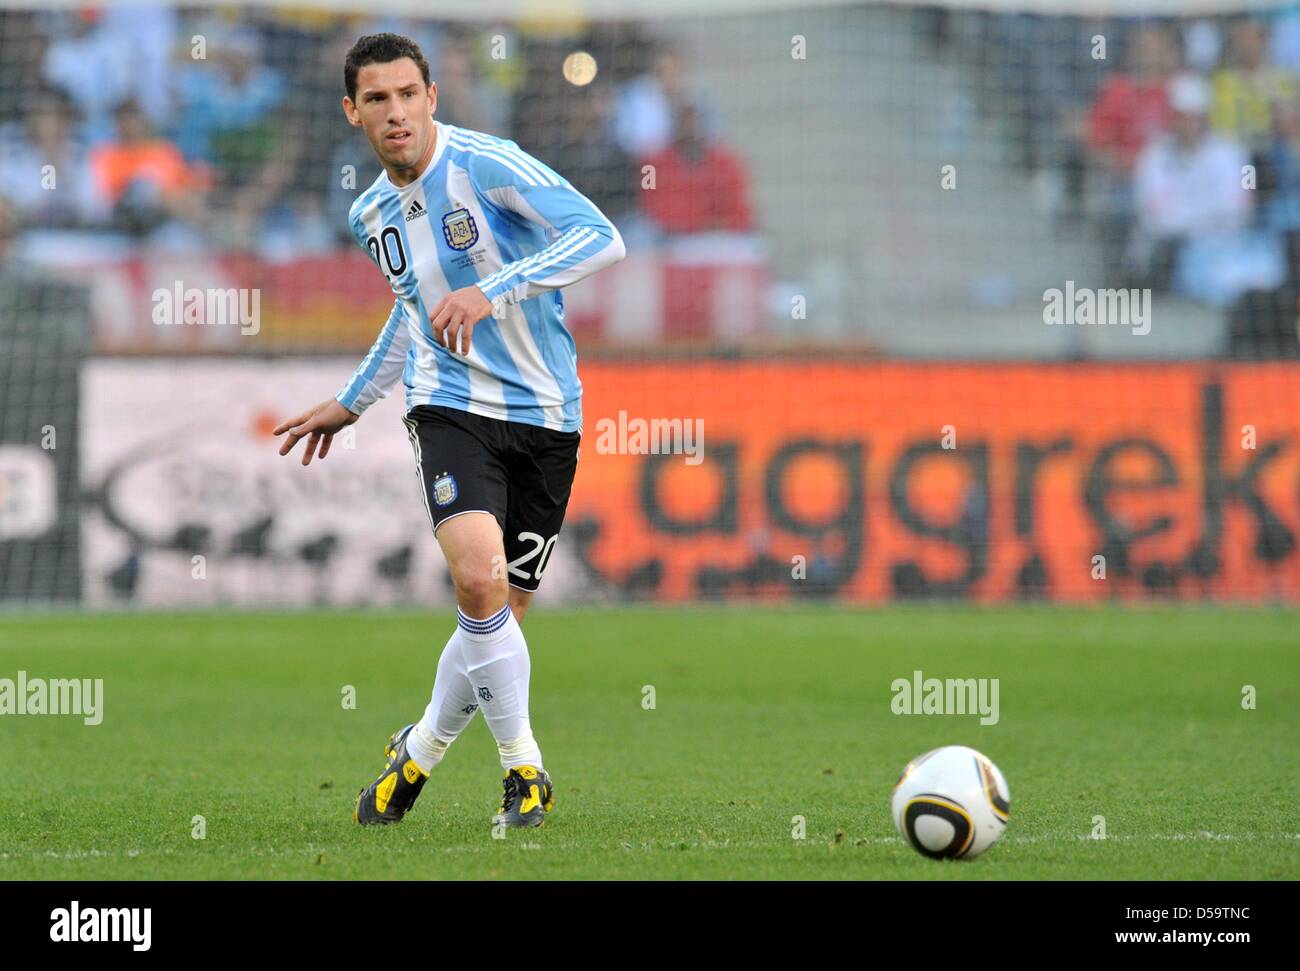 Maxi Rodriguez of Argentina controls the ball during the FIFA World Cup 2010 quarterfinal match between Argentina and Germany at the Green Point Stadium in Cape Town, South Africa 03 July 2010. Photo: Bernd Weissbrod dpa - Please refer to http://dpaq.de/FIFA-WM2010-TC Stock Photo